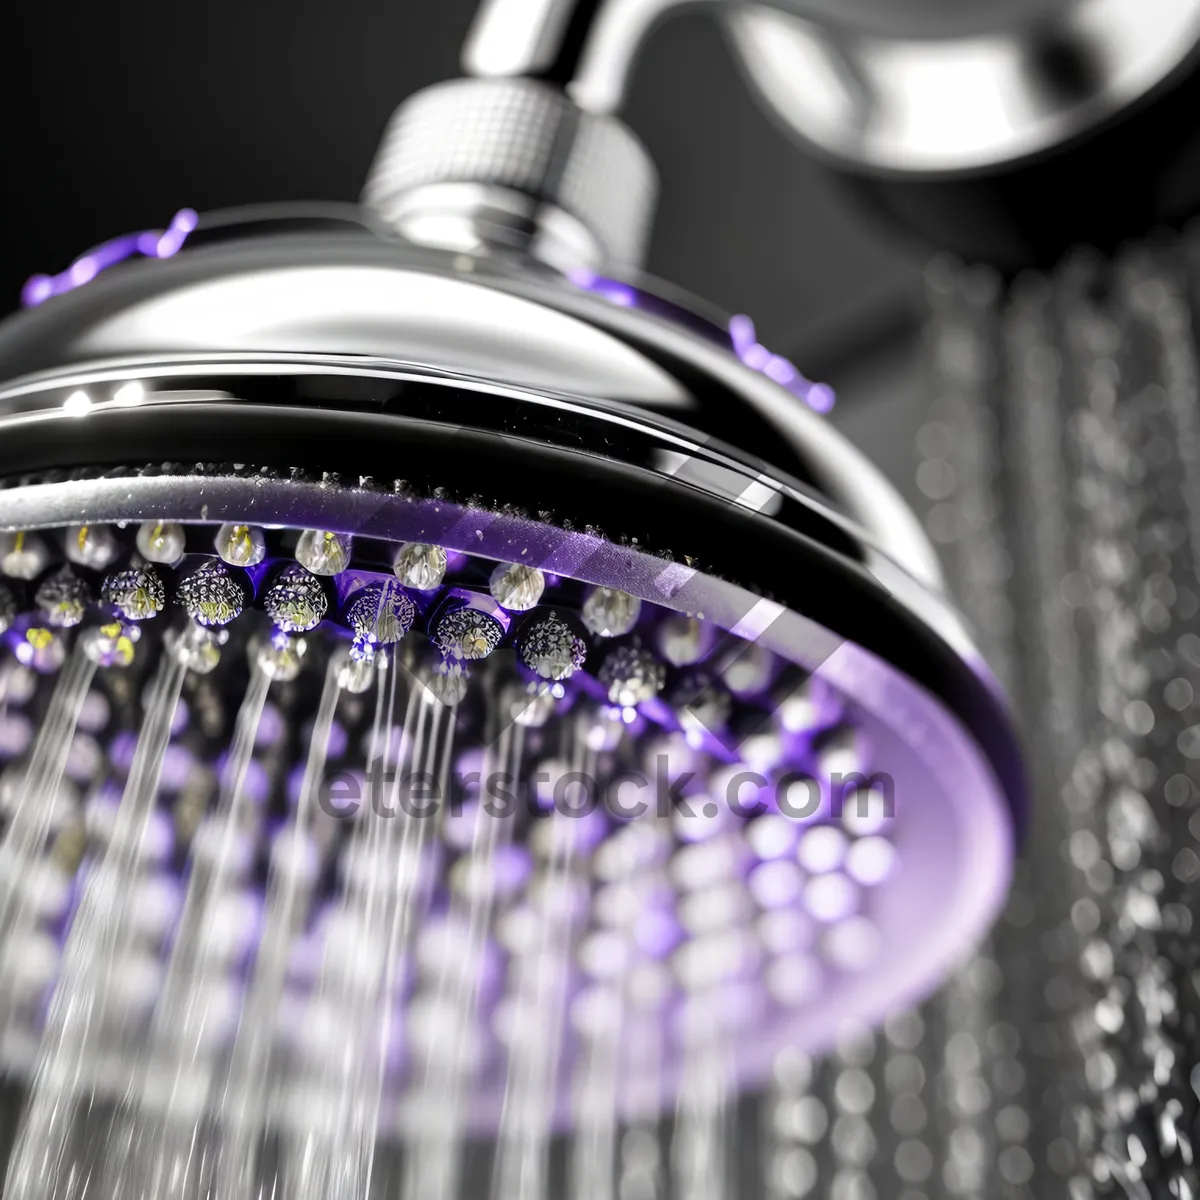 Picture of LED Shower Fixture: Advanced Plumbing Technology for Illuminated Showers